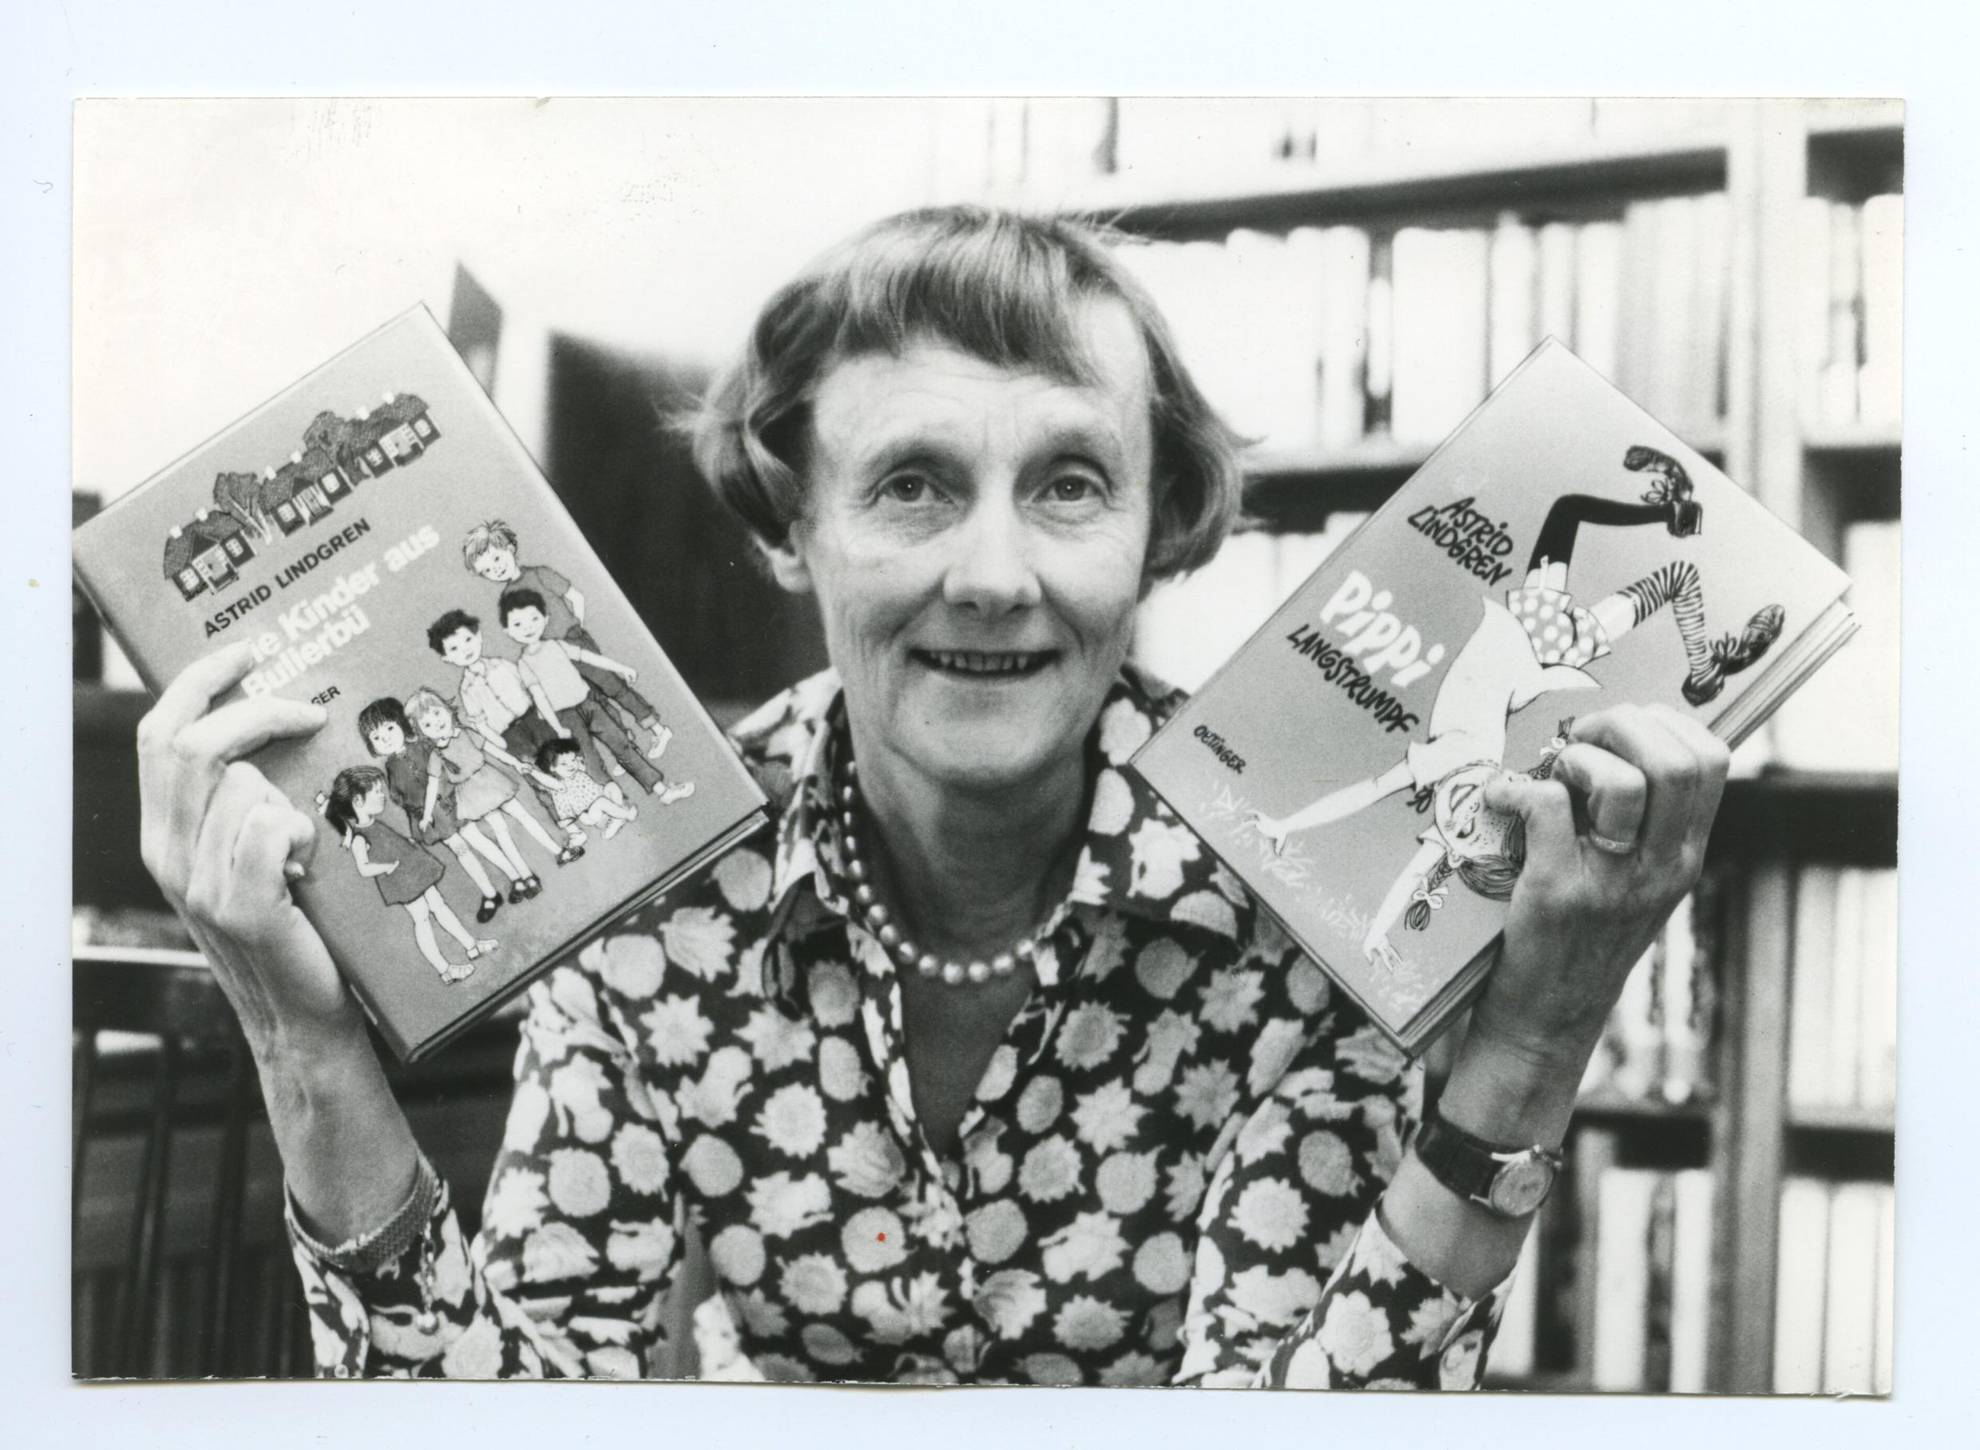 A black and white portrait of the author Astrid Lindgren holding her book Pippi Longstocking in one hand and the book the Noisy Village children in the other hand.